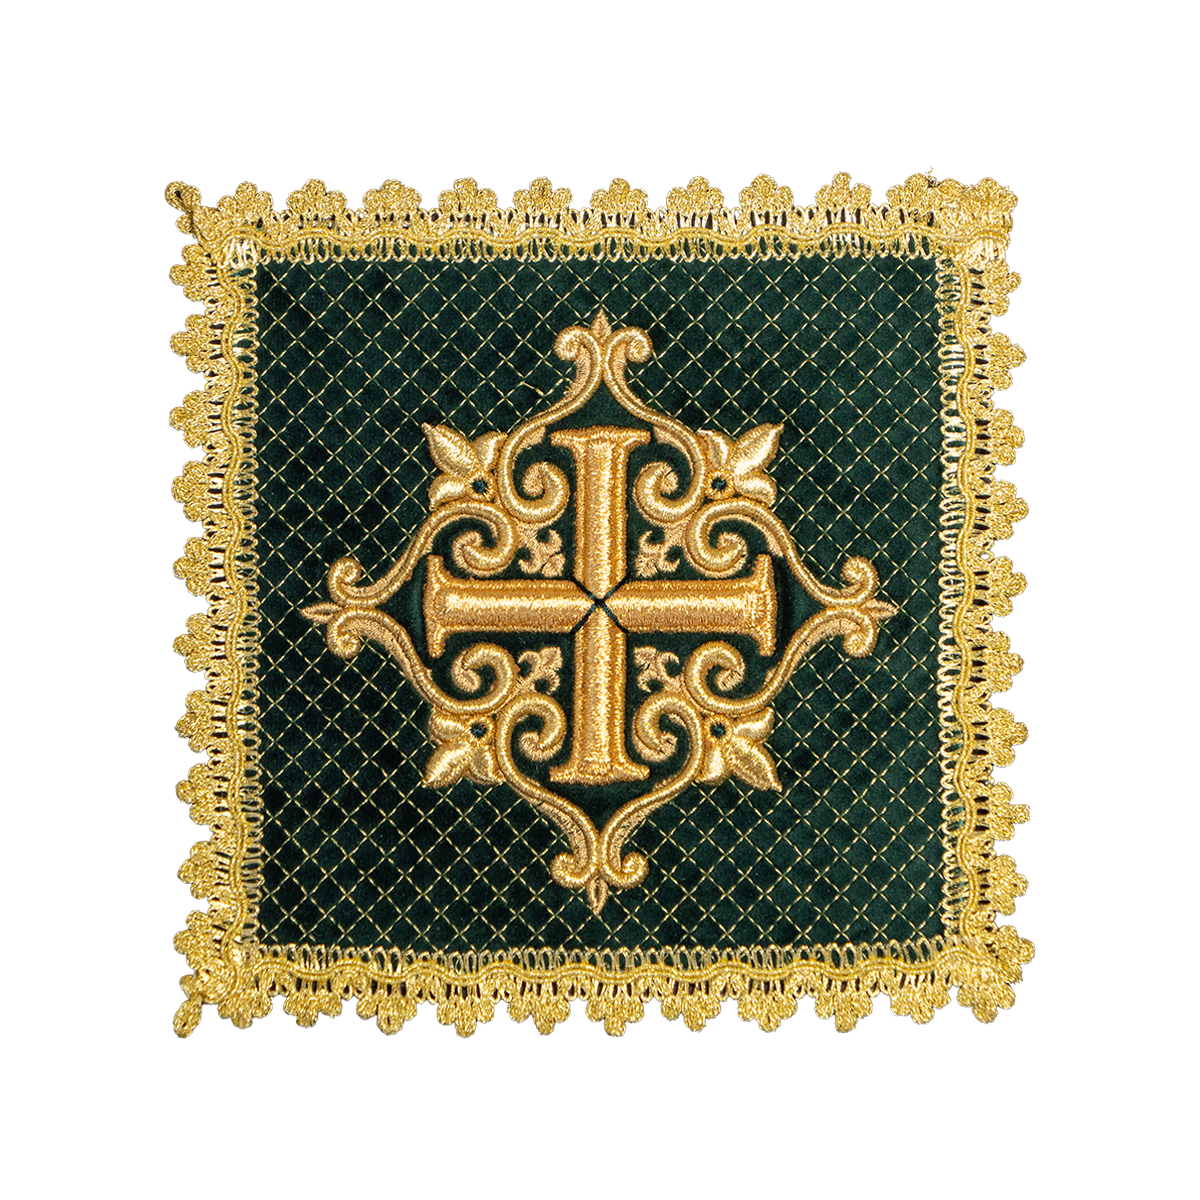 Embroidered chalice linen green gold cross